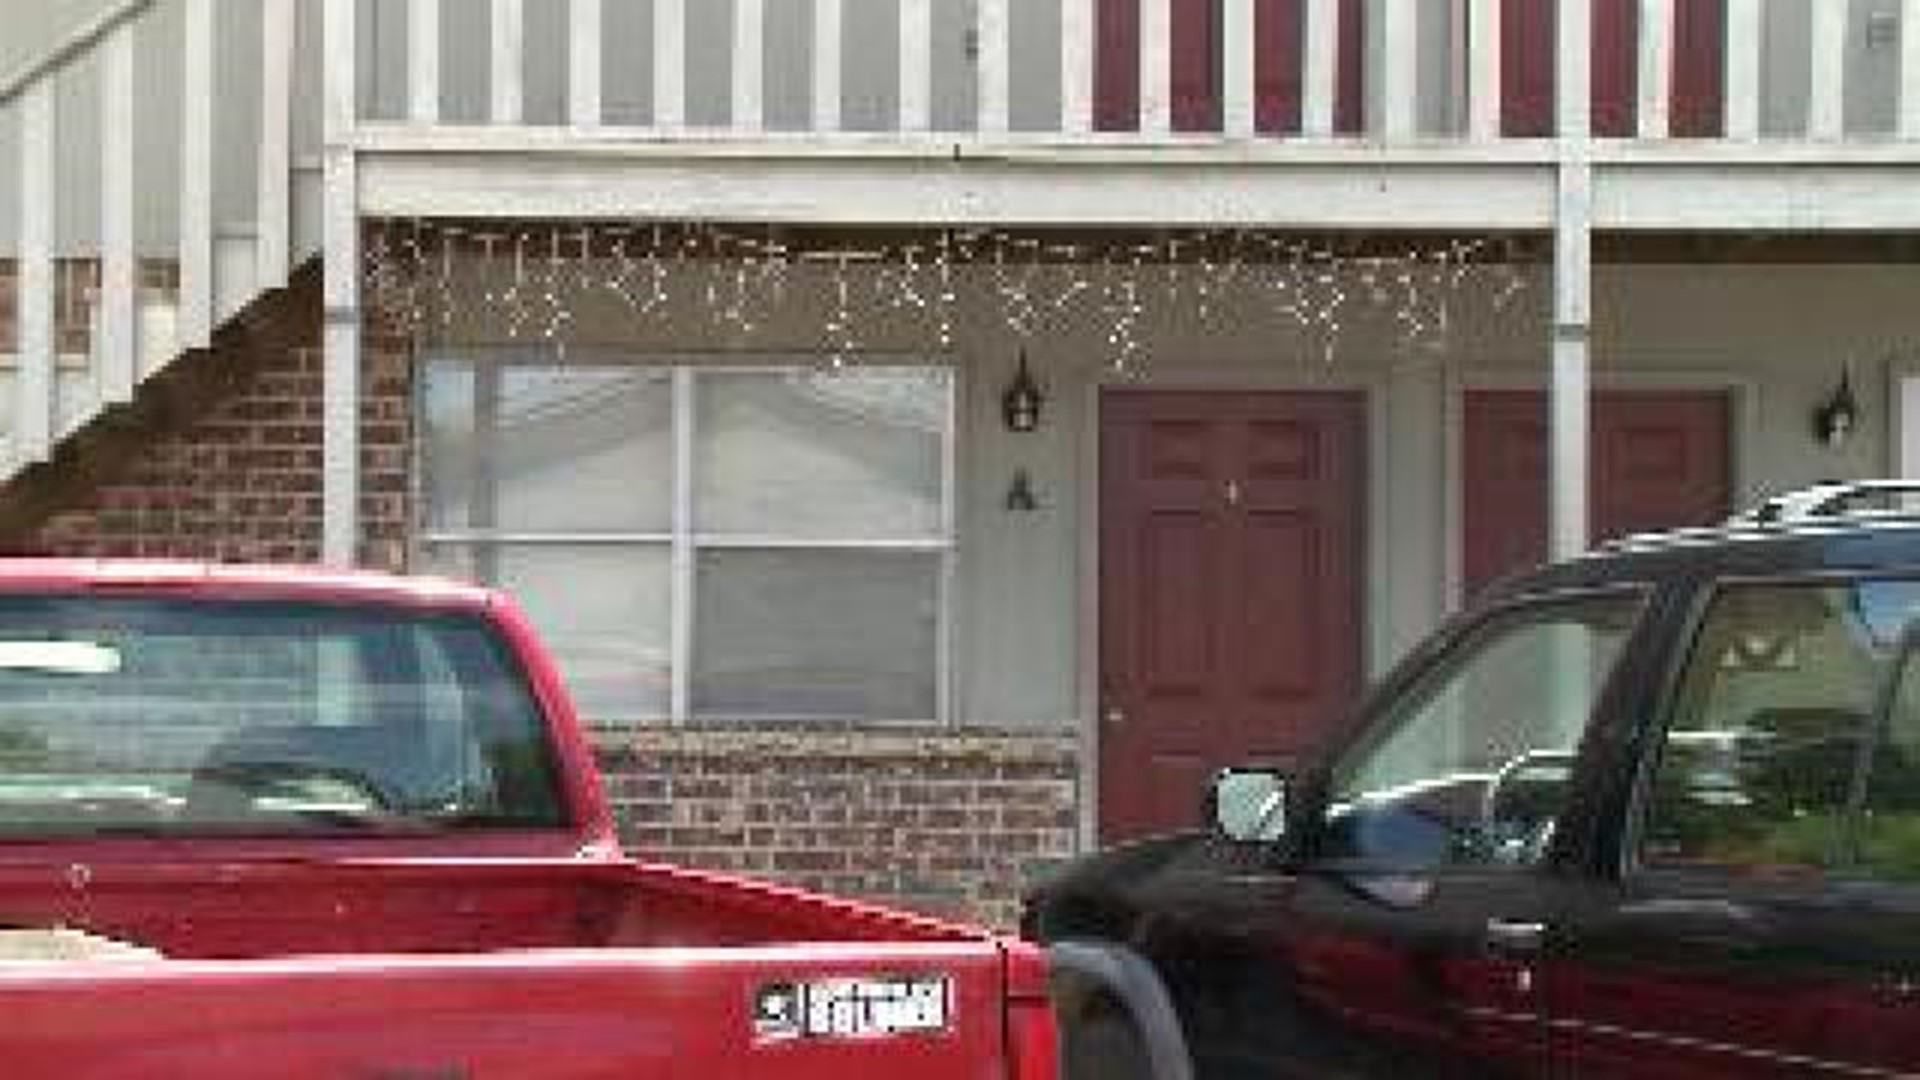 Neighbors Nervous After Drive-By